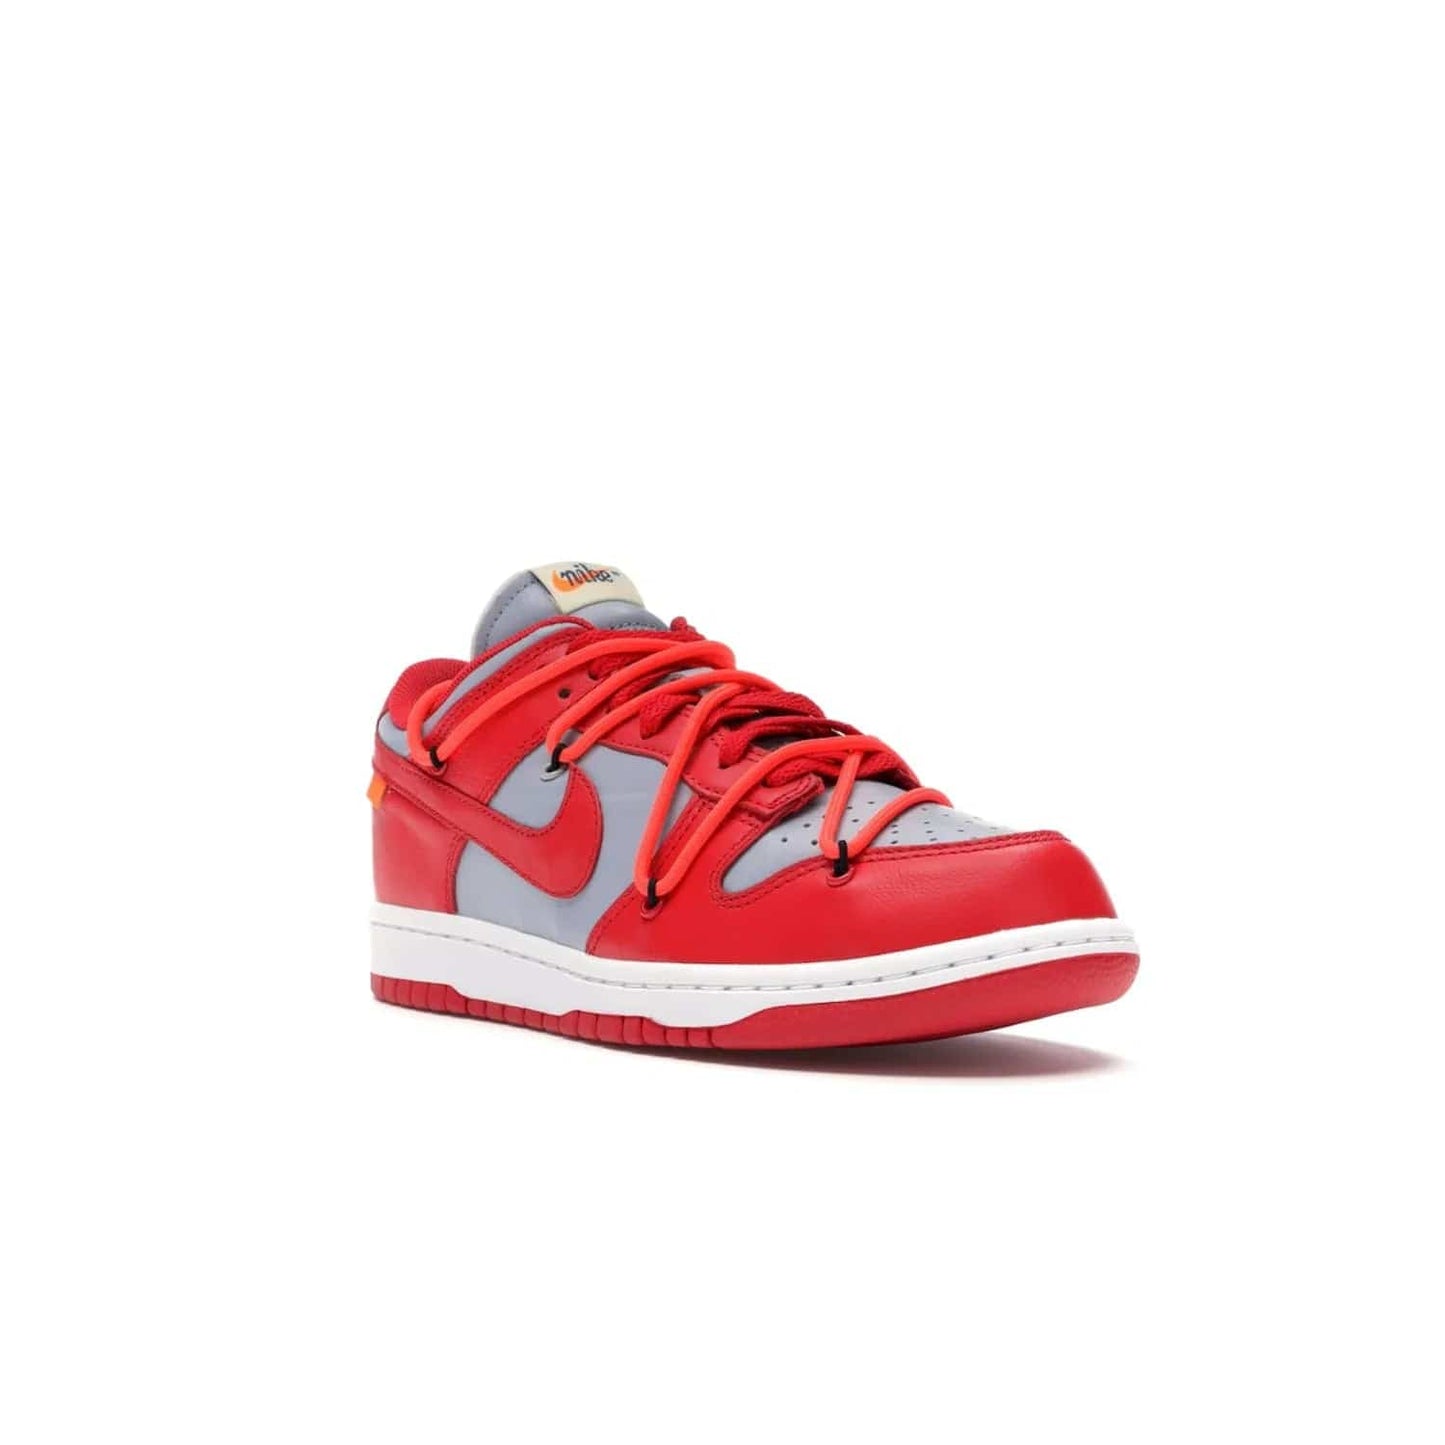 Nike Dunk Low Off-White University Red - Image 6 - Only at www.BallersClubKickz.com - The Nike Dunk Low Off-White University Red offers tribute to classic Nike Basketball silhouettes. Features include wolf grey leather, university red overlays, zip-ties, and Off-White text. Perfect for any sneaker fan, these stylish sneakers released in December of 2019.